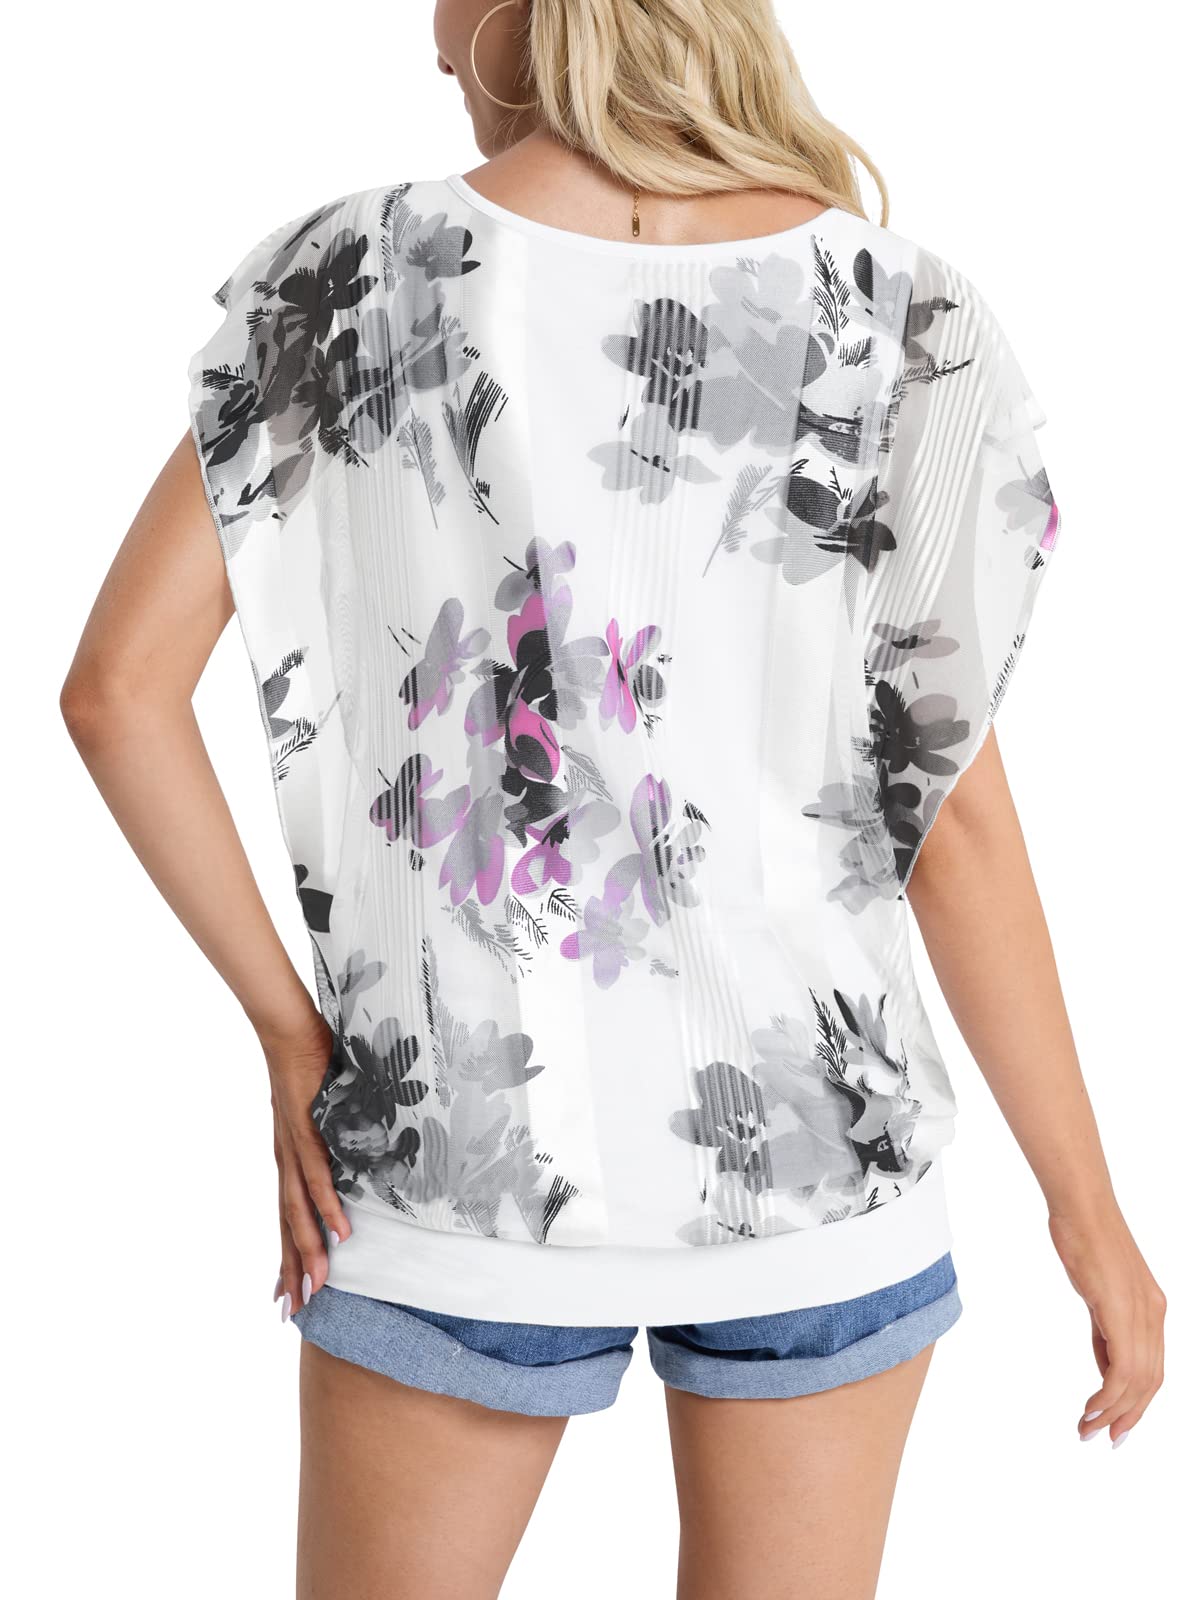 BAISHENGGT White Floral Printed Women's Printed Flouncing Flared Short Sleeve Mesh Blouse Tops